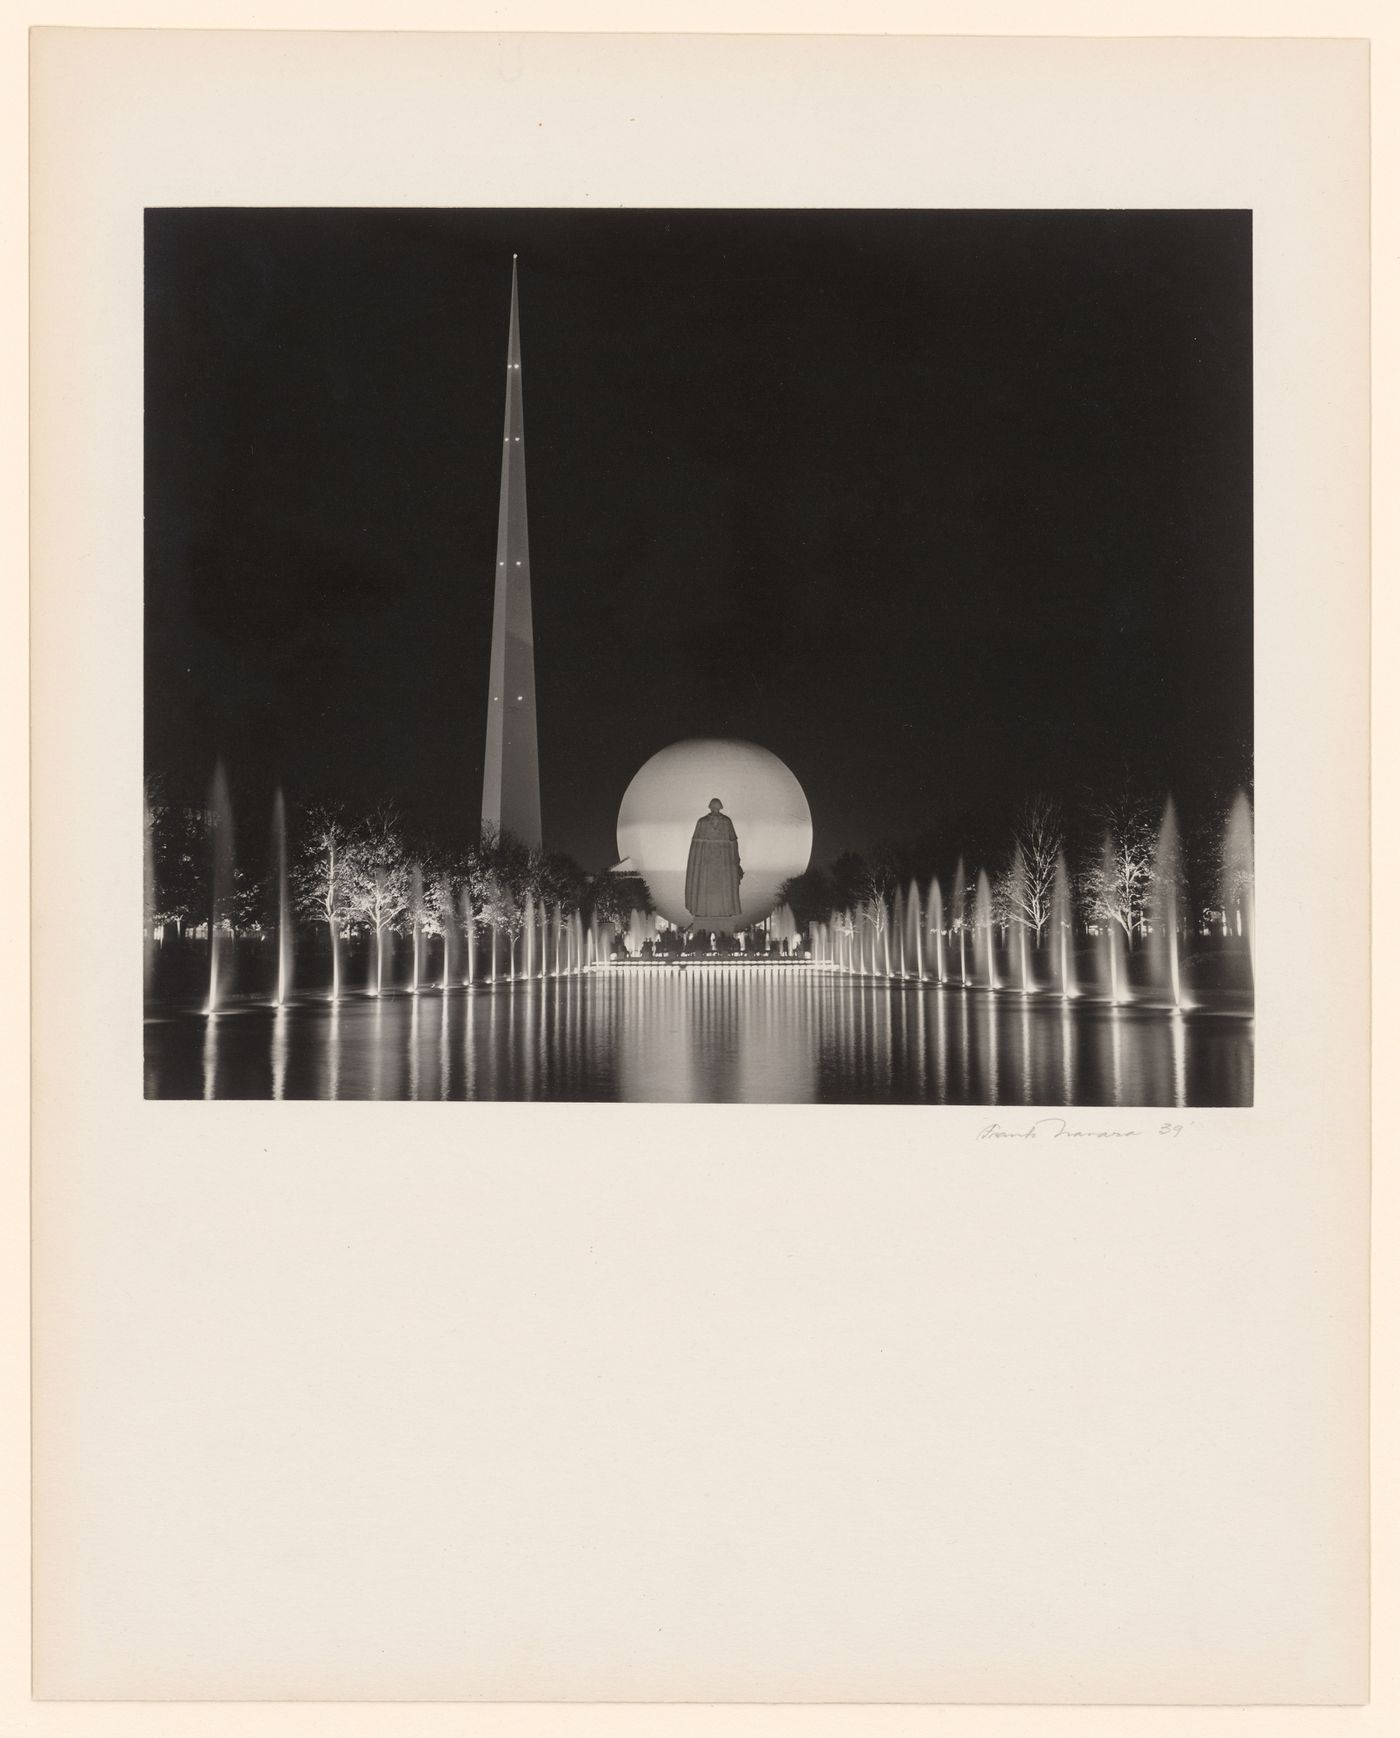 New York World's Fair (1939-1940): Night view, Constitution Mall basin with lit side fountains, Trylon Perisphere Statue of George Washington at far end